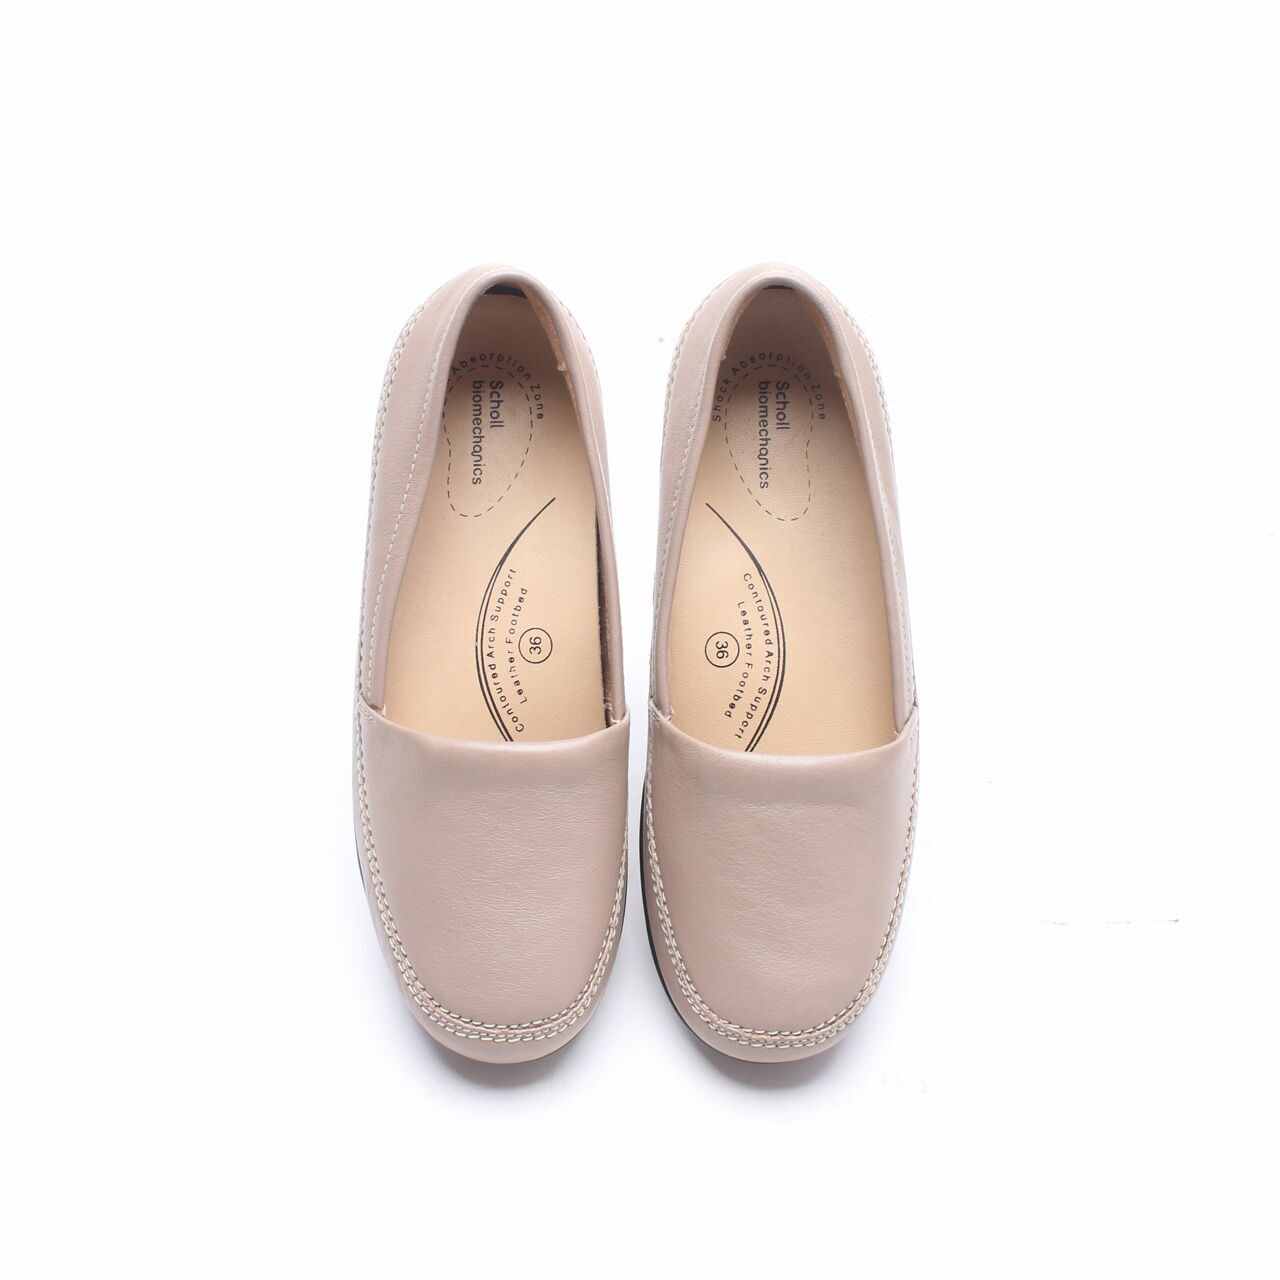 Scholl Katty Taupe Slip On Flats Shoes